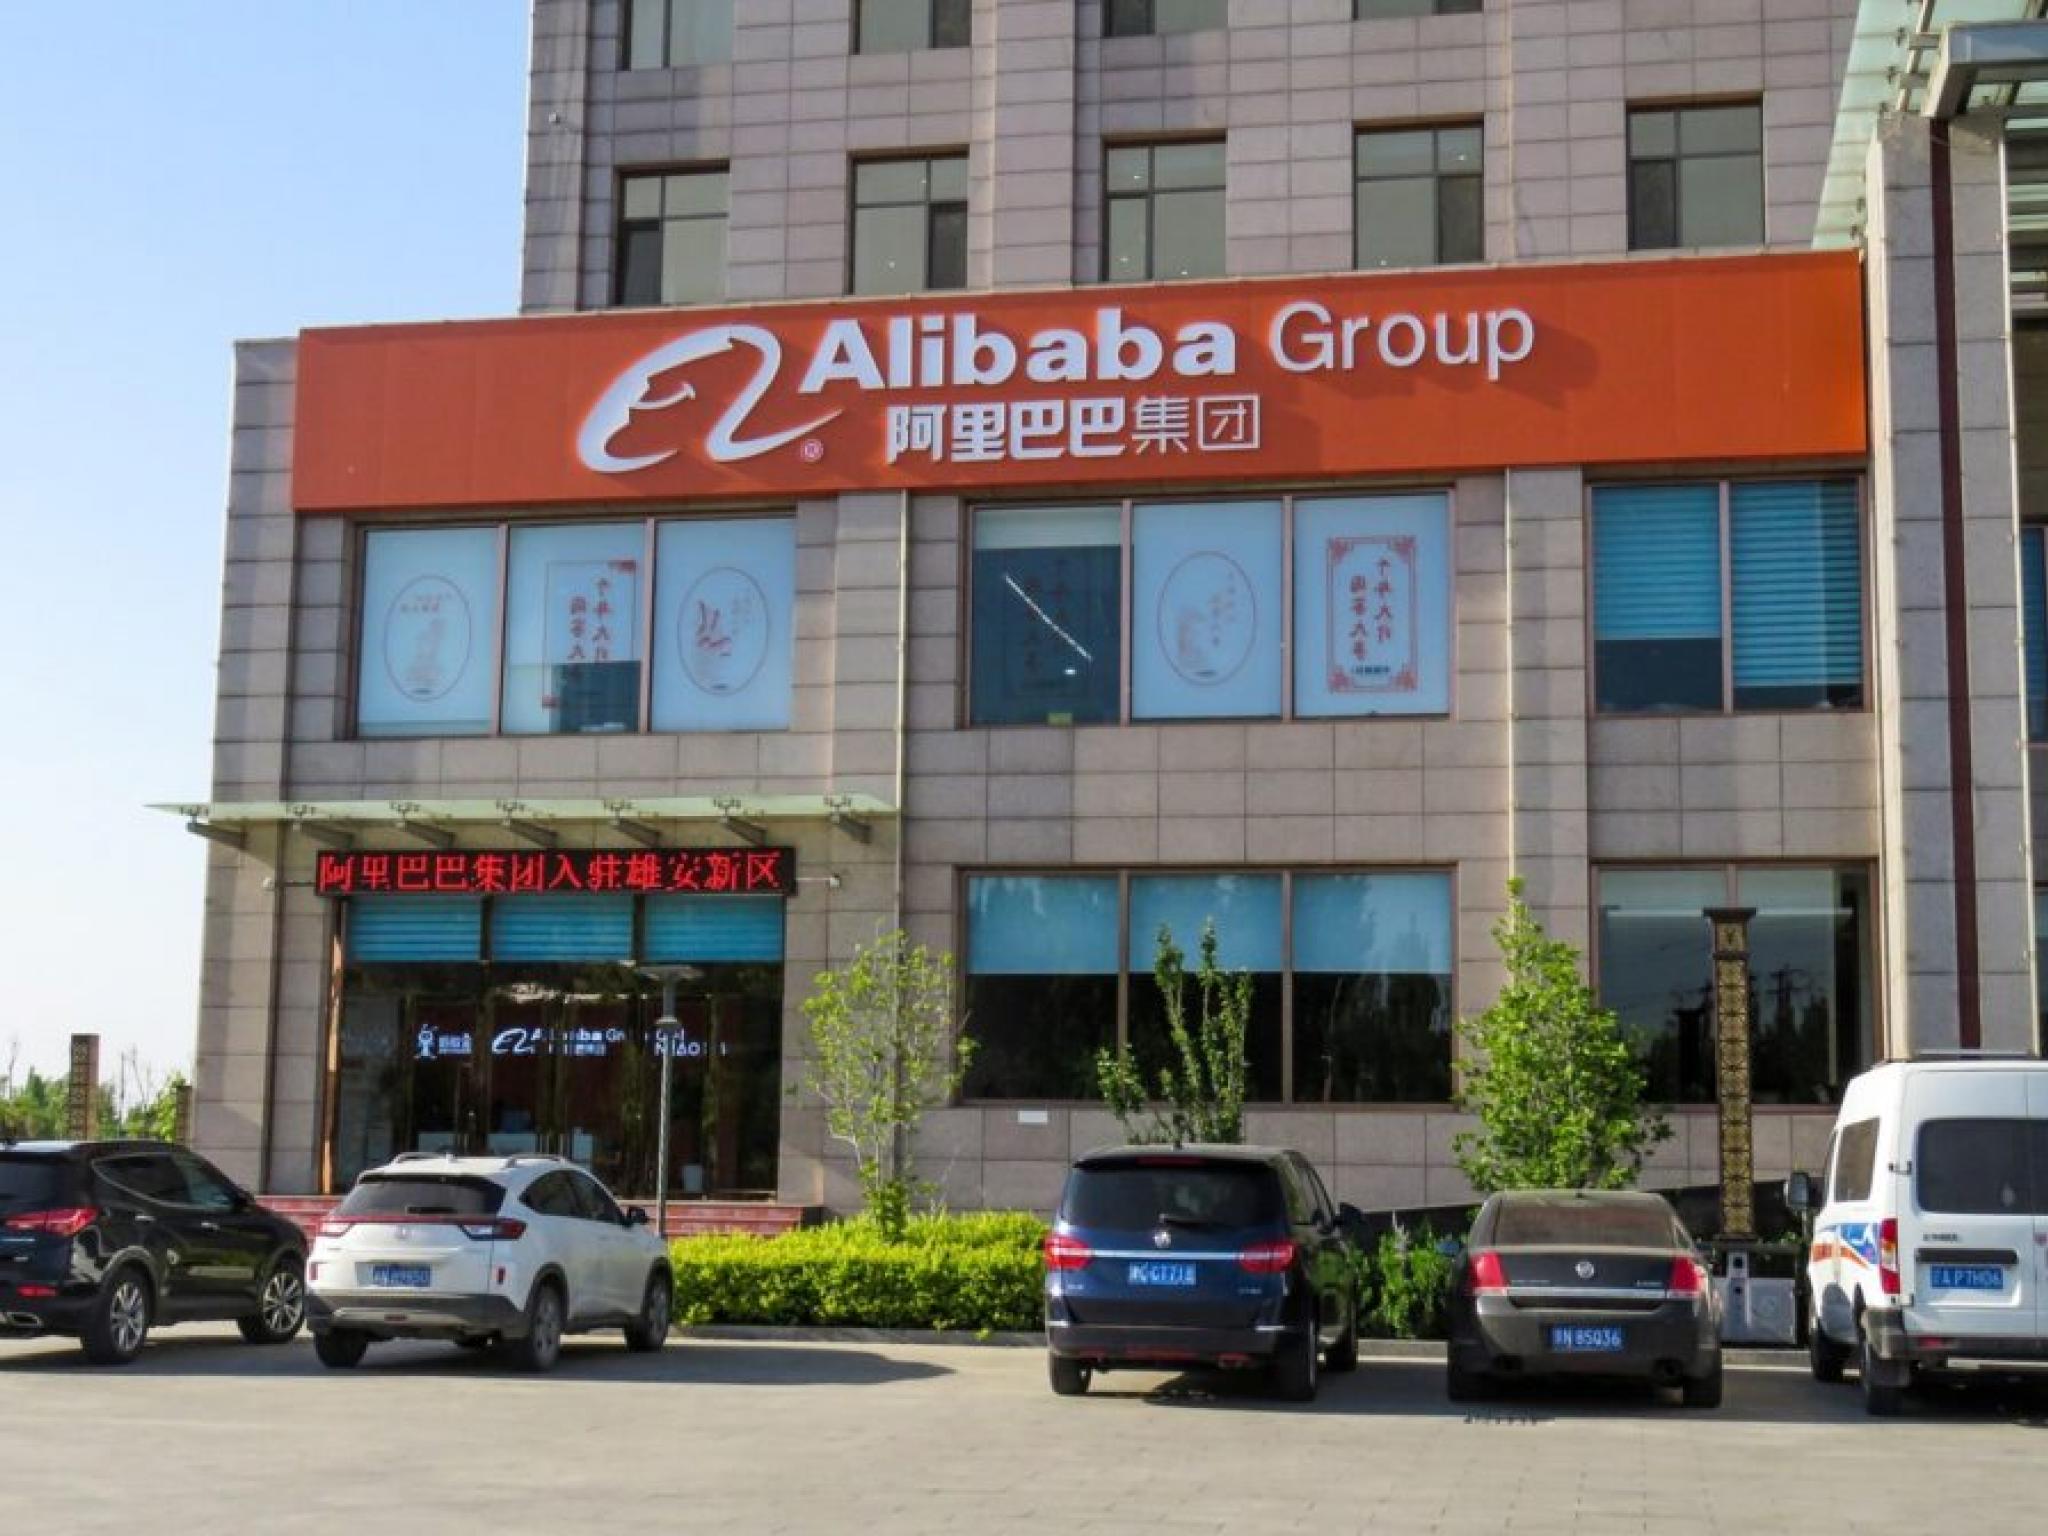  alibaba-revamps-management-team-aiming-for-innovation-and-growth-amid-challenges 